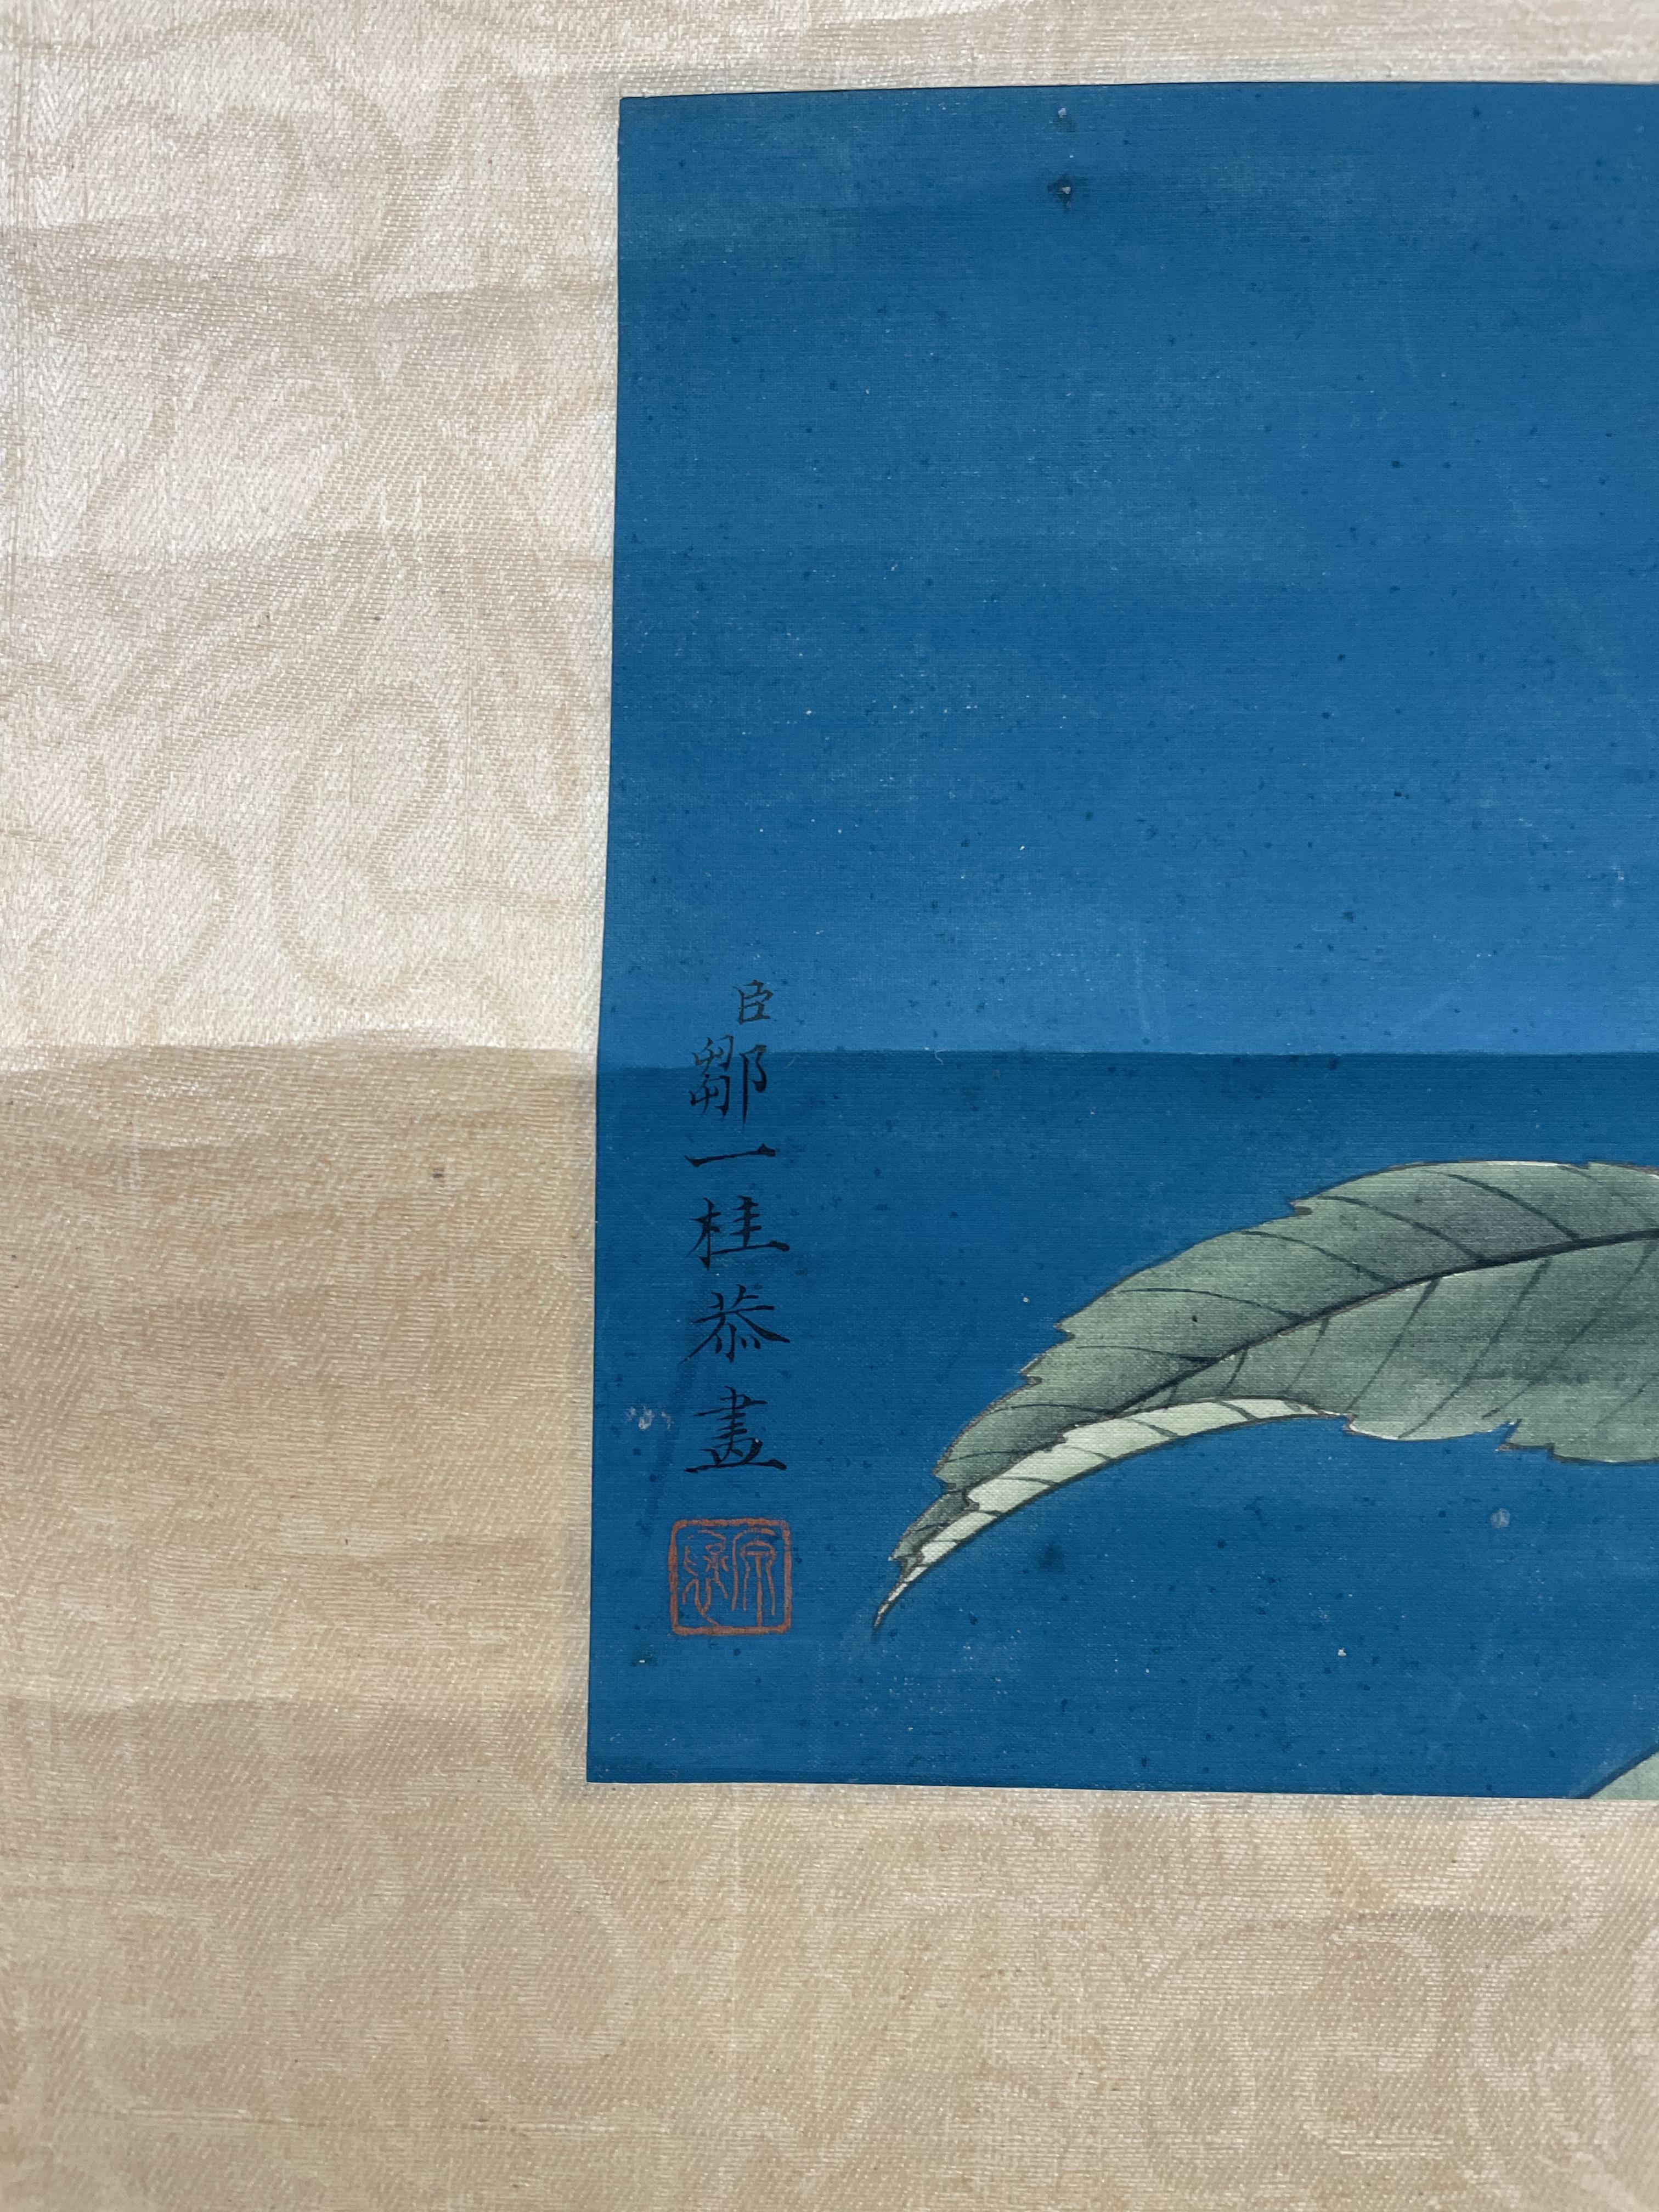 ZOU YIGUI 鄒一桂 (Wuxi, China, 1686 - 1772) Four flower paintings 花卉軸四件 - Image 6 of 17